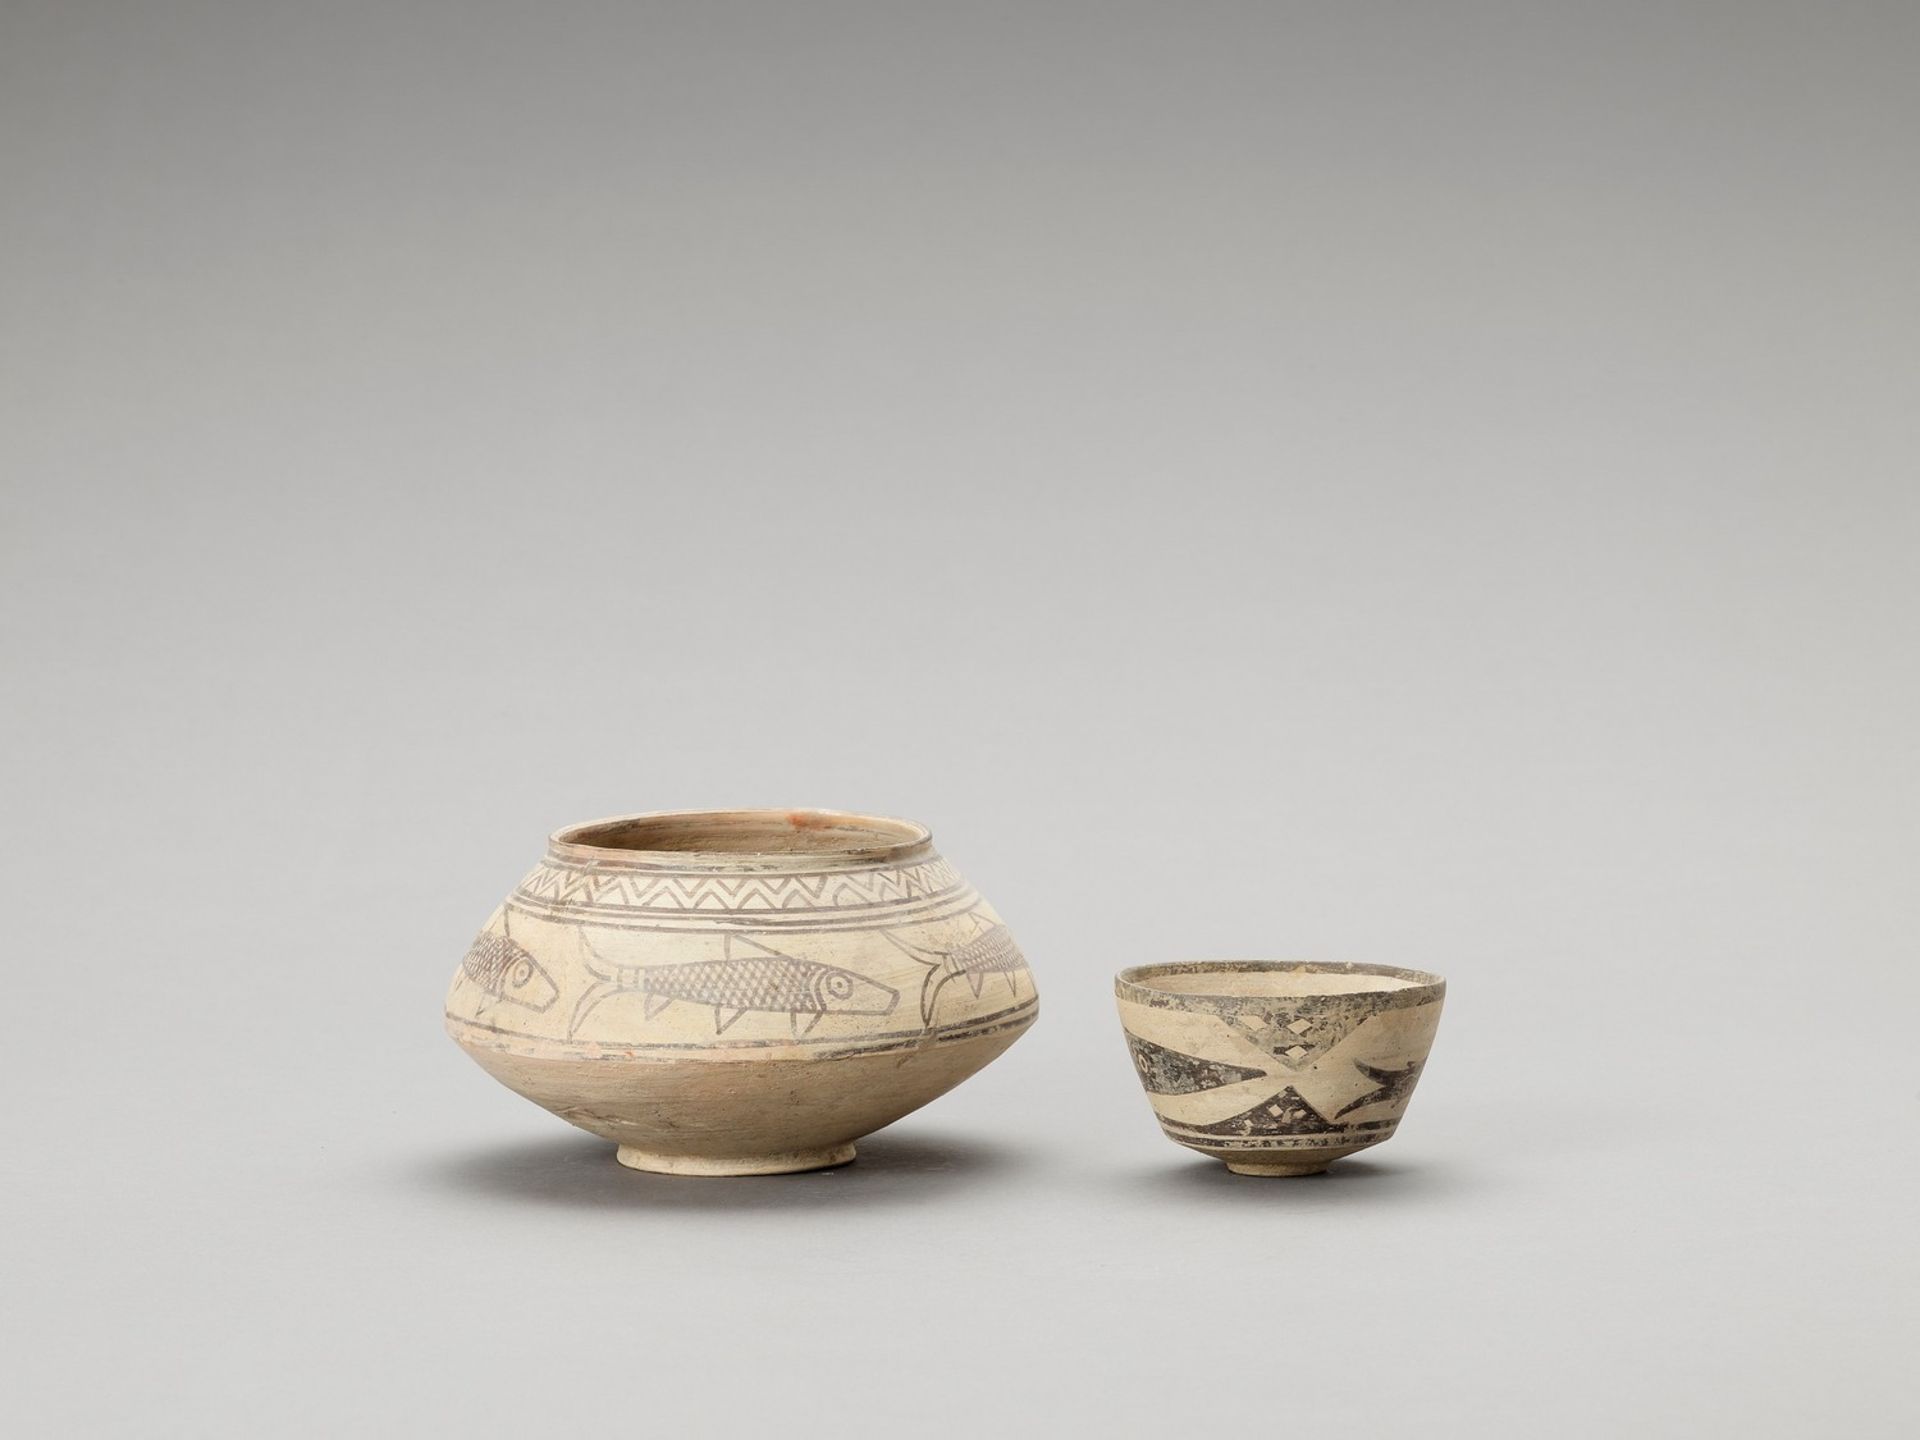 TWO NAL WARE CERAMIC VESSELS WITH FISH - Image 2 of 7